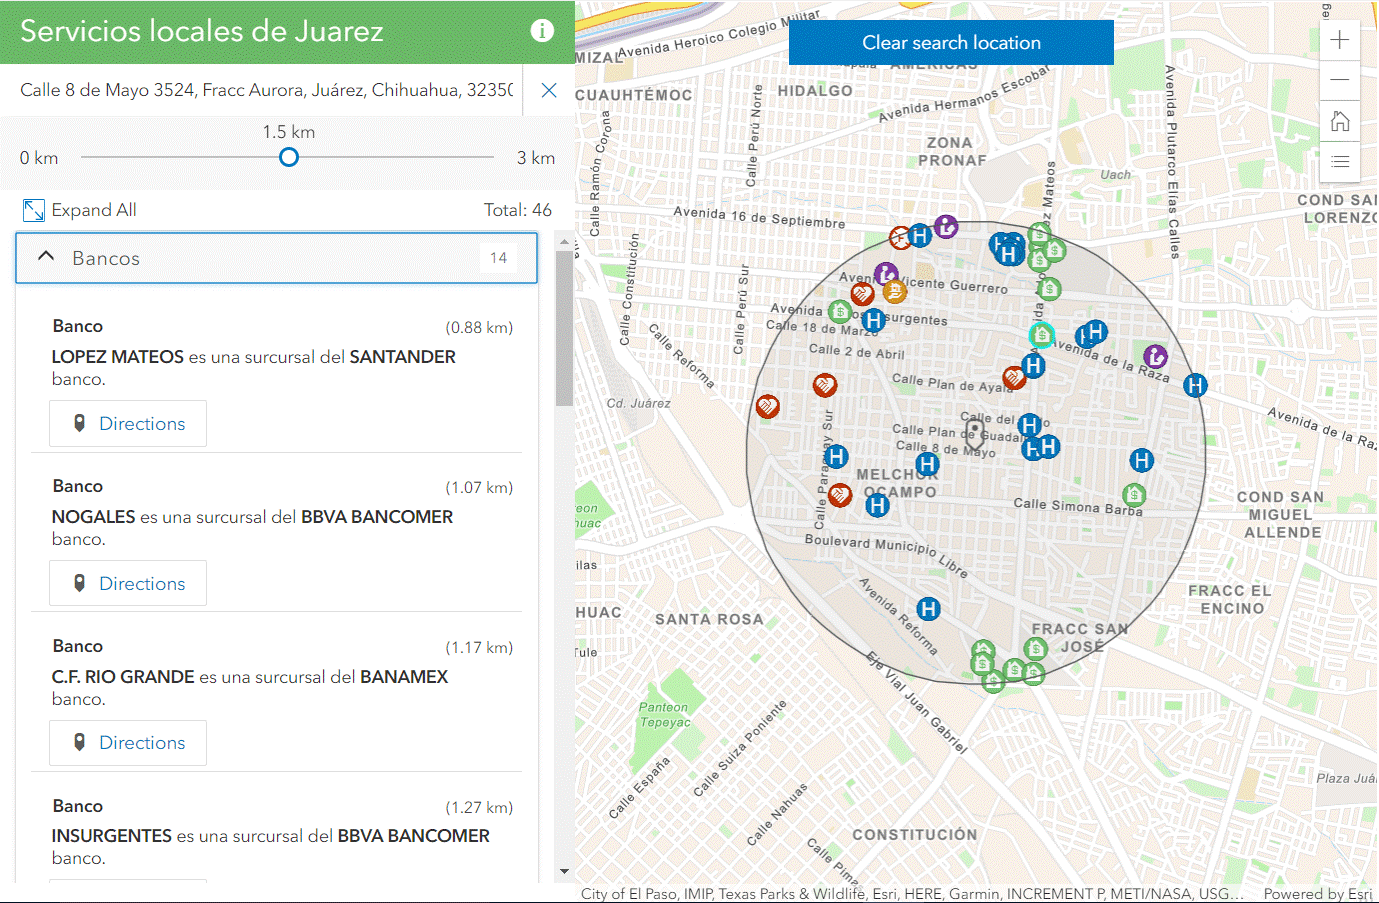 A screenshot of the Nearby application.